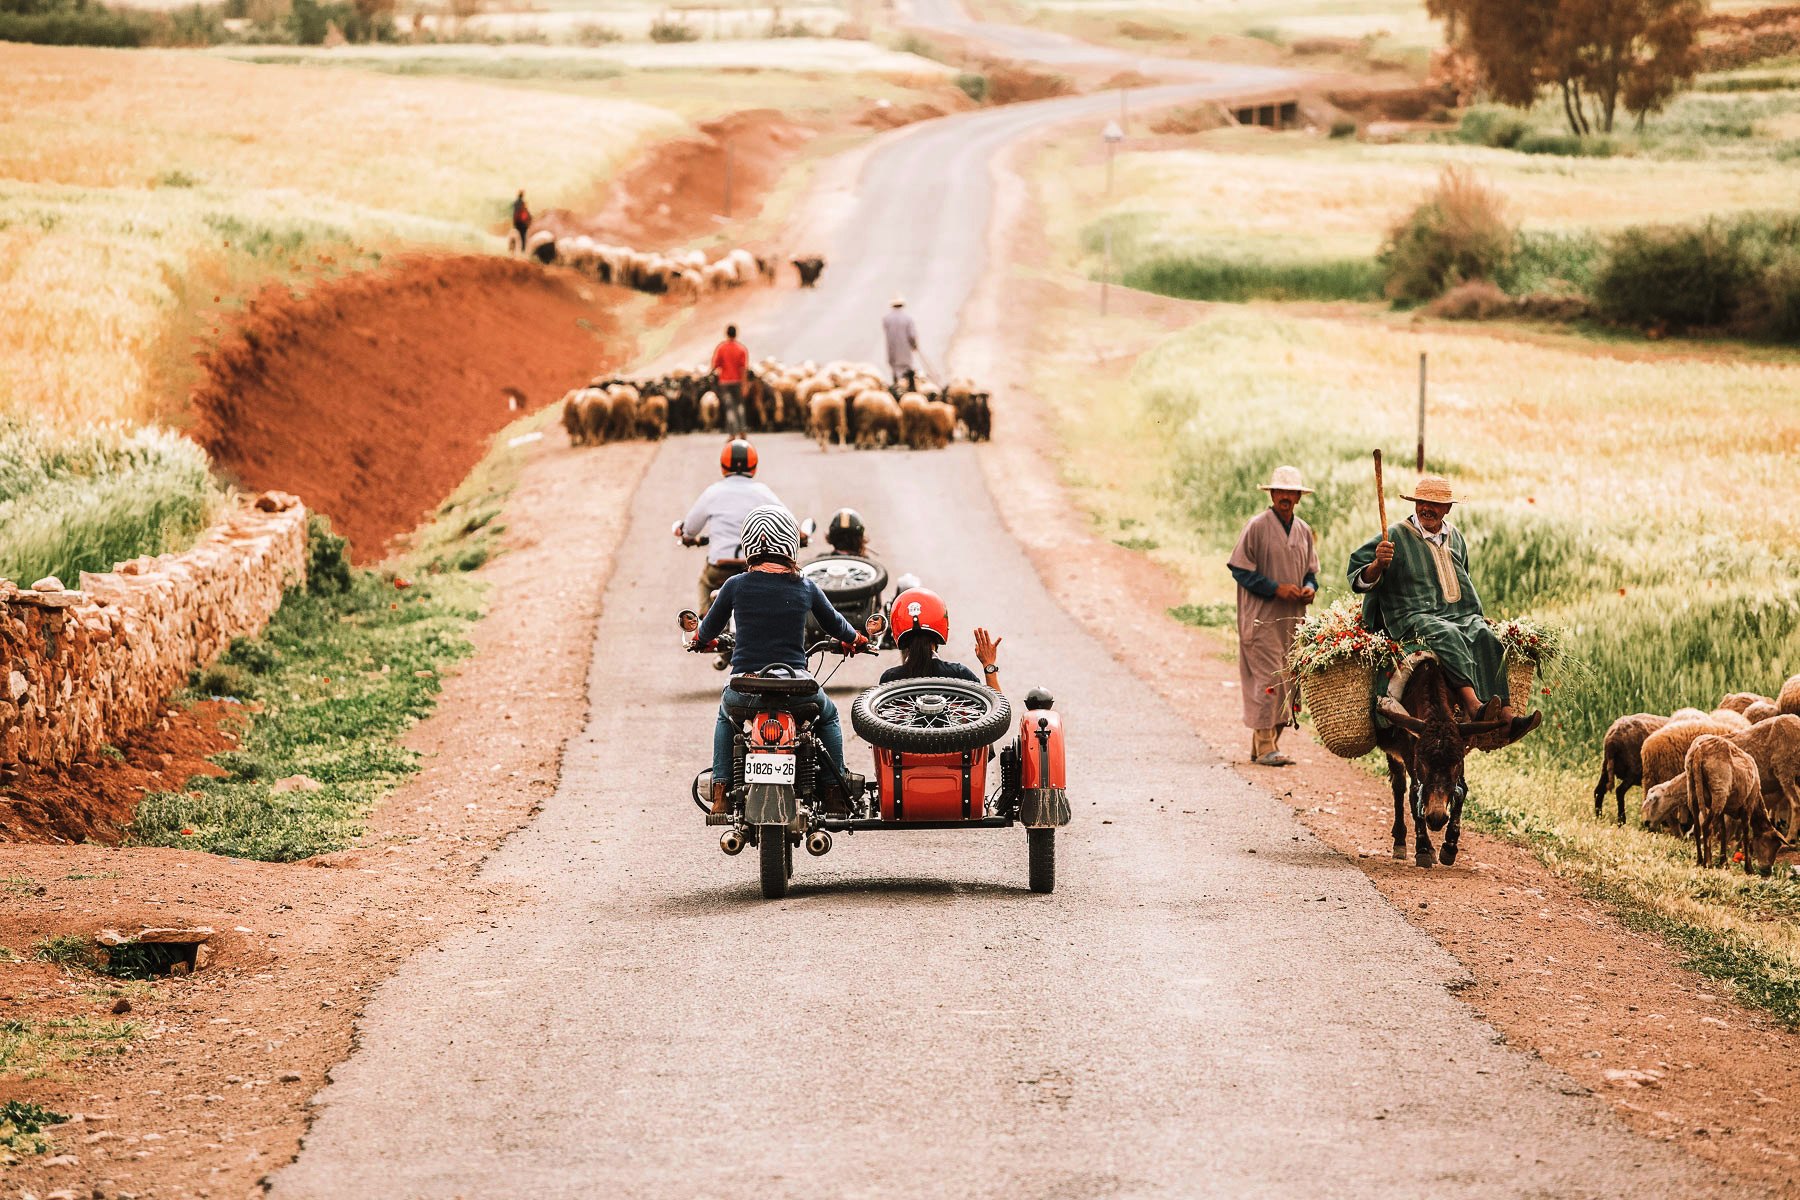 Morocco sidecar tour from Marrakech to the Atlas Mountains and Berber villages